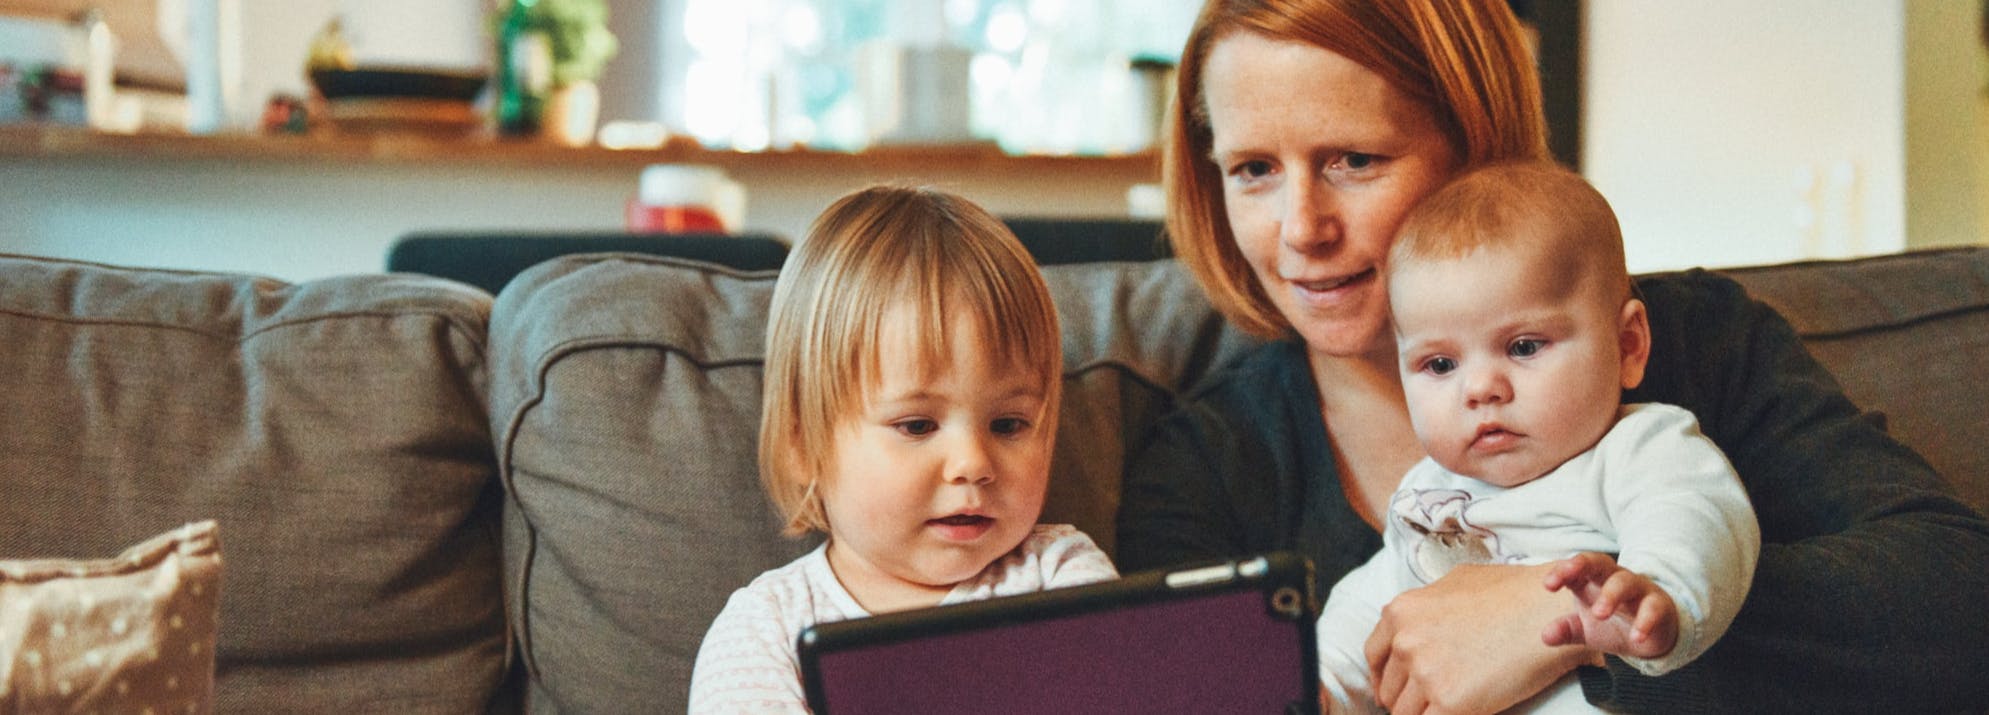 A woman, a toddler and a baby sitting on a sofa looking at a tablet